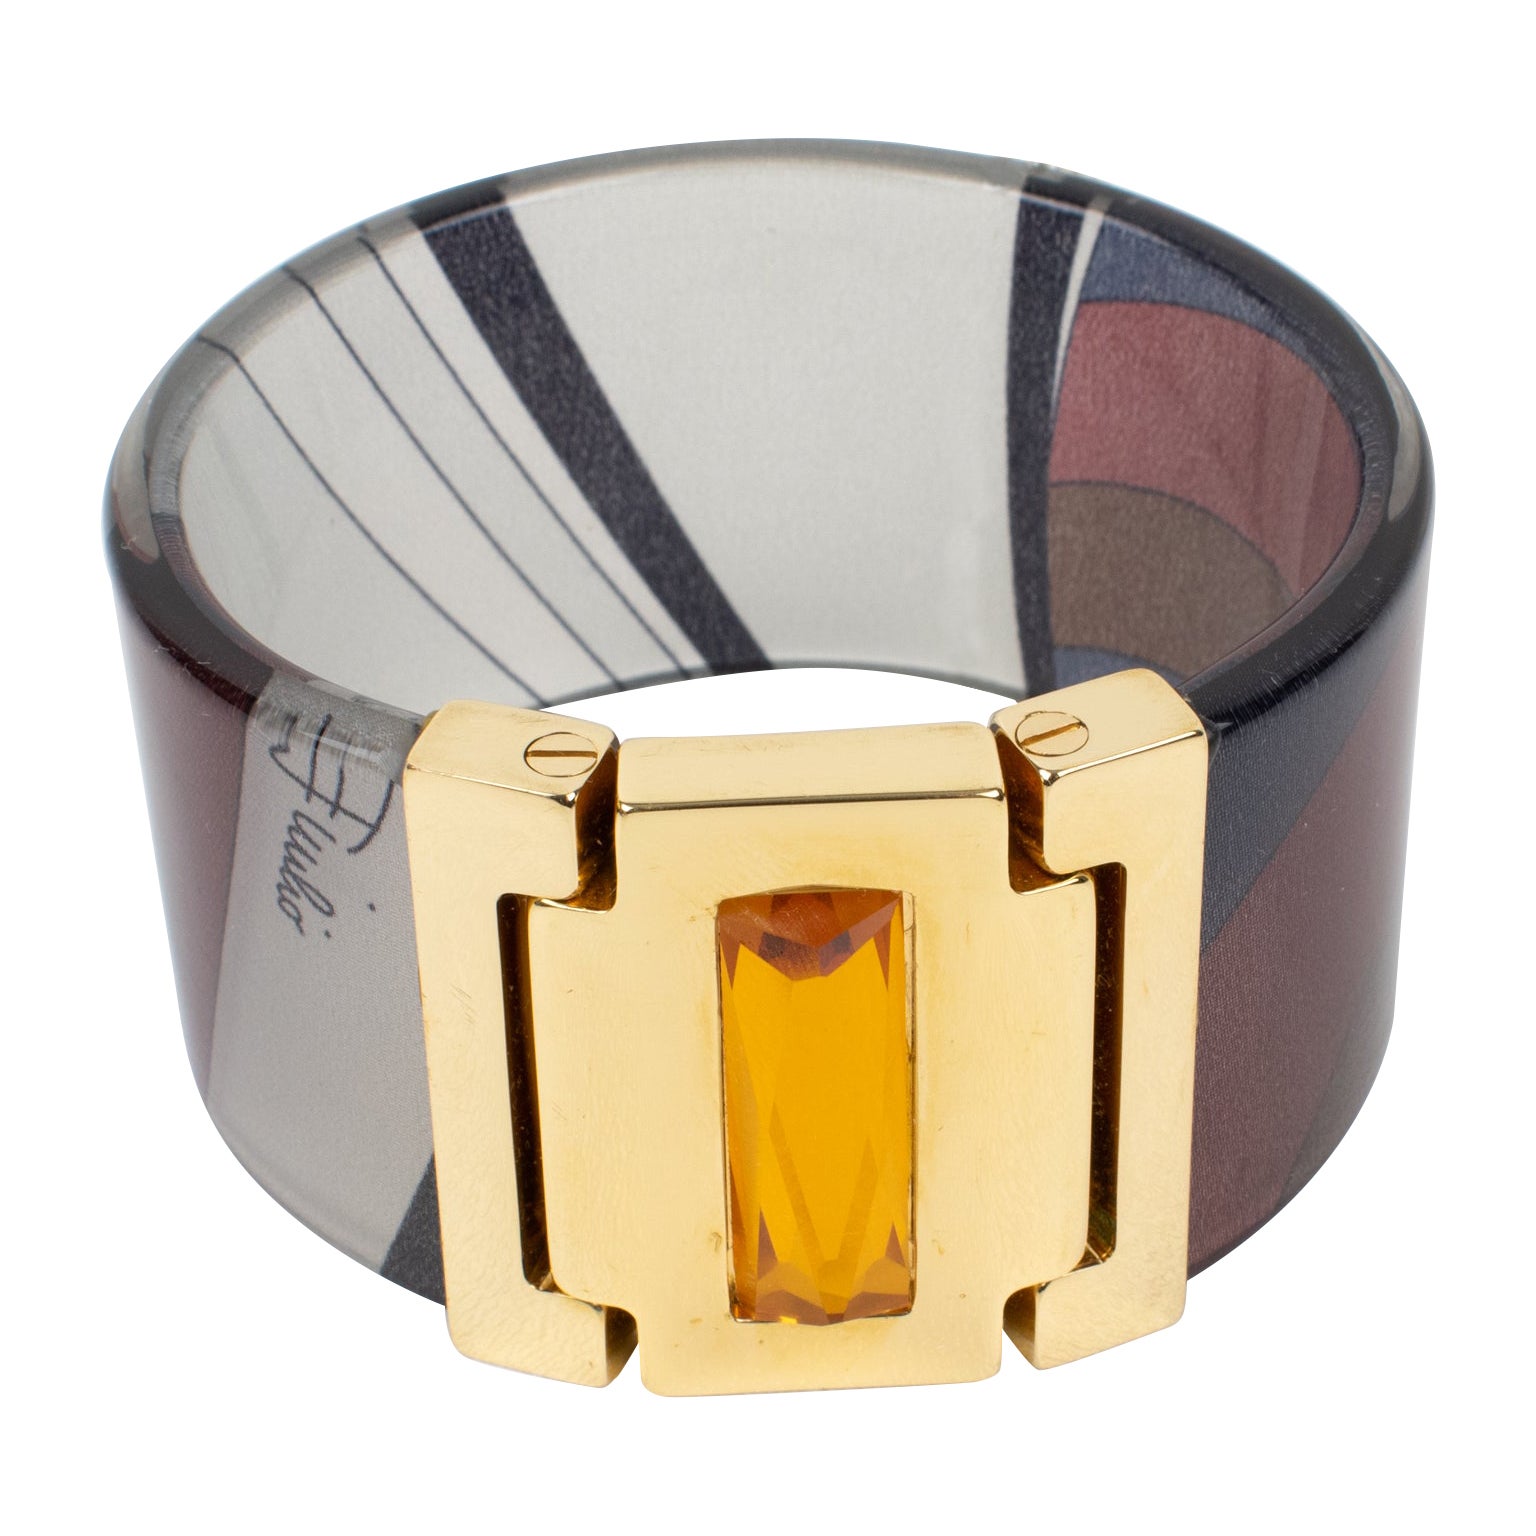 Emilio Pucci Jeweled Bracelet Bangle Lucite with Purple and Gray Silk Inclusion For Sale